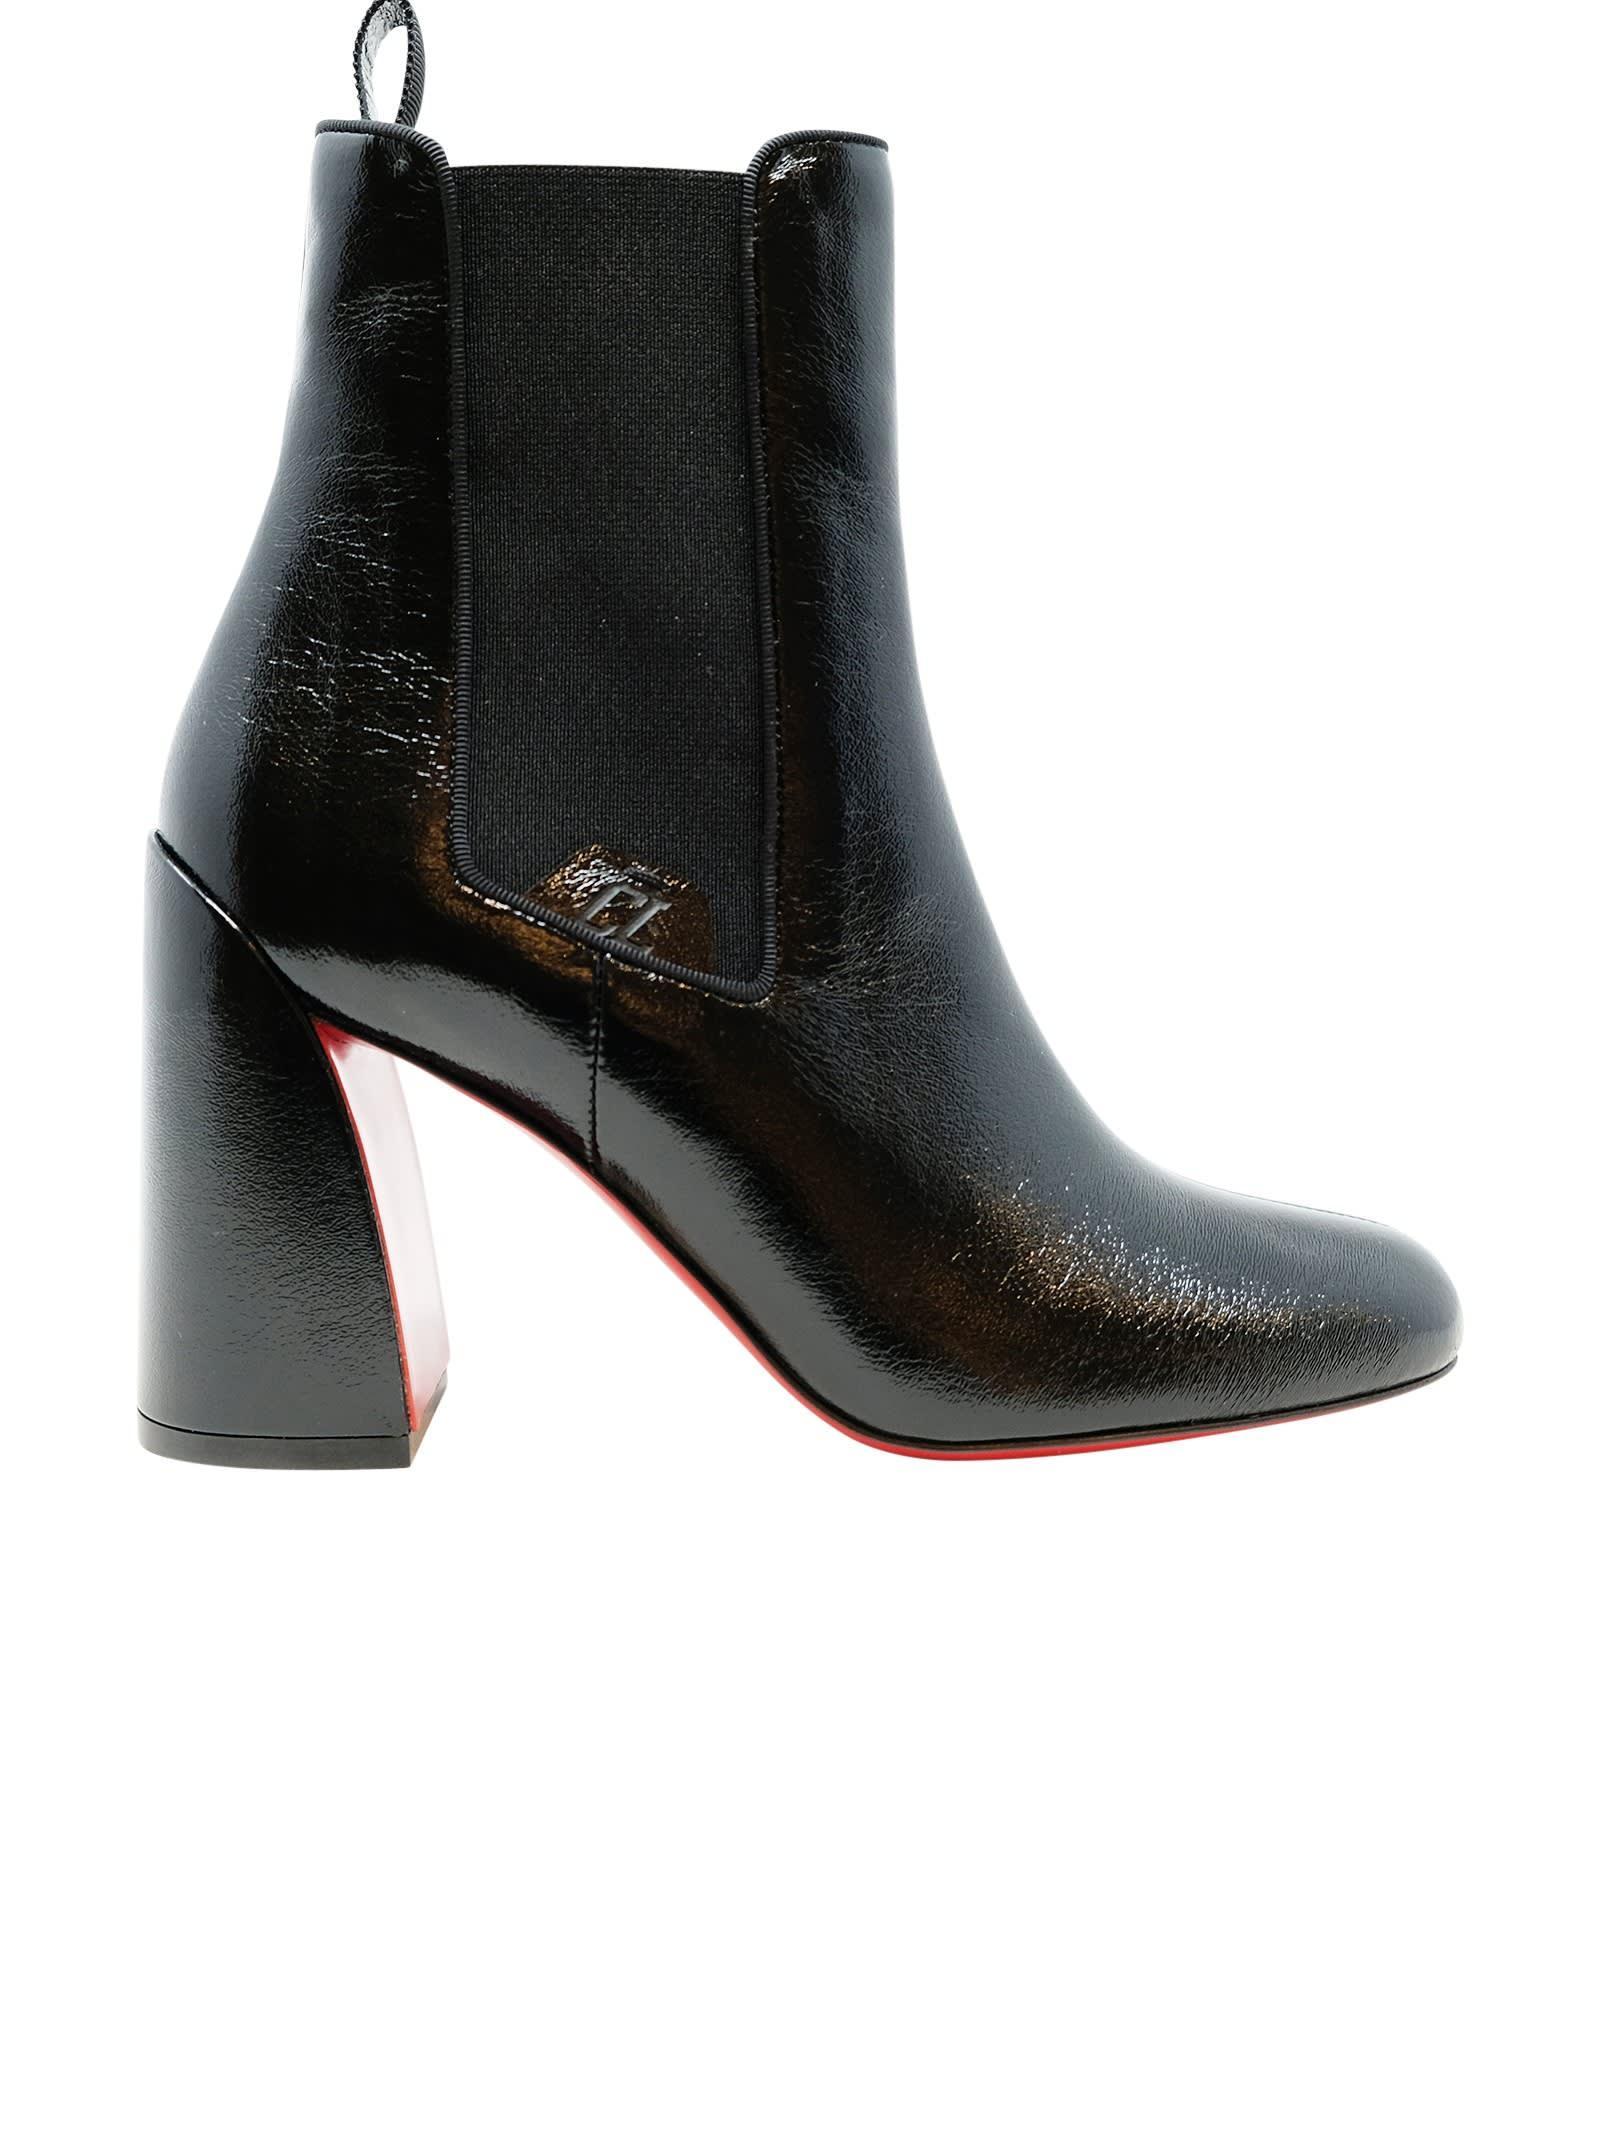 Christian Louboutin Turelastic Leather Ankle Boots 55 - Black - 37.5